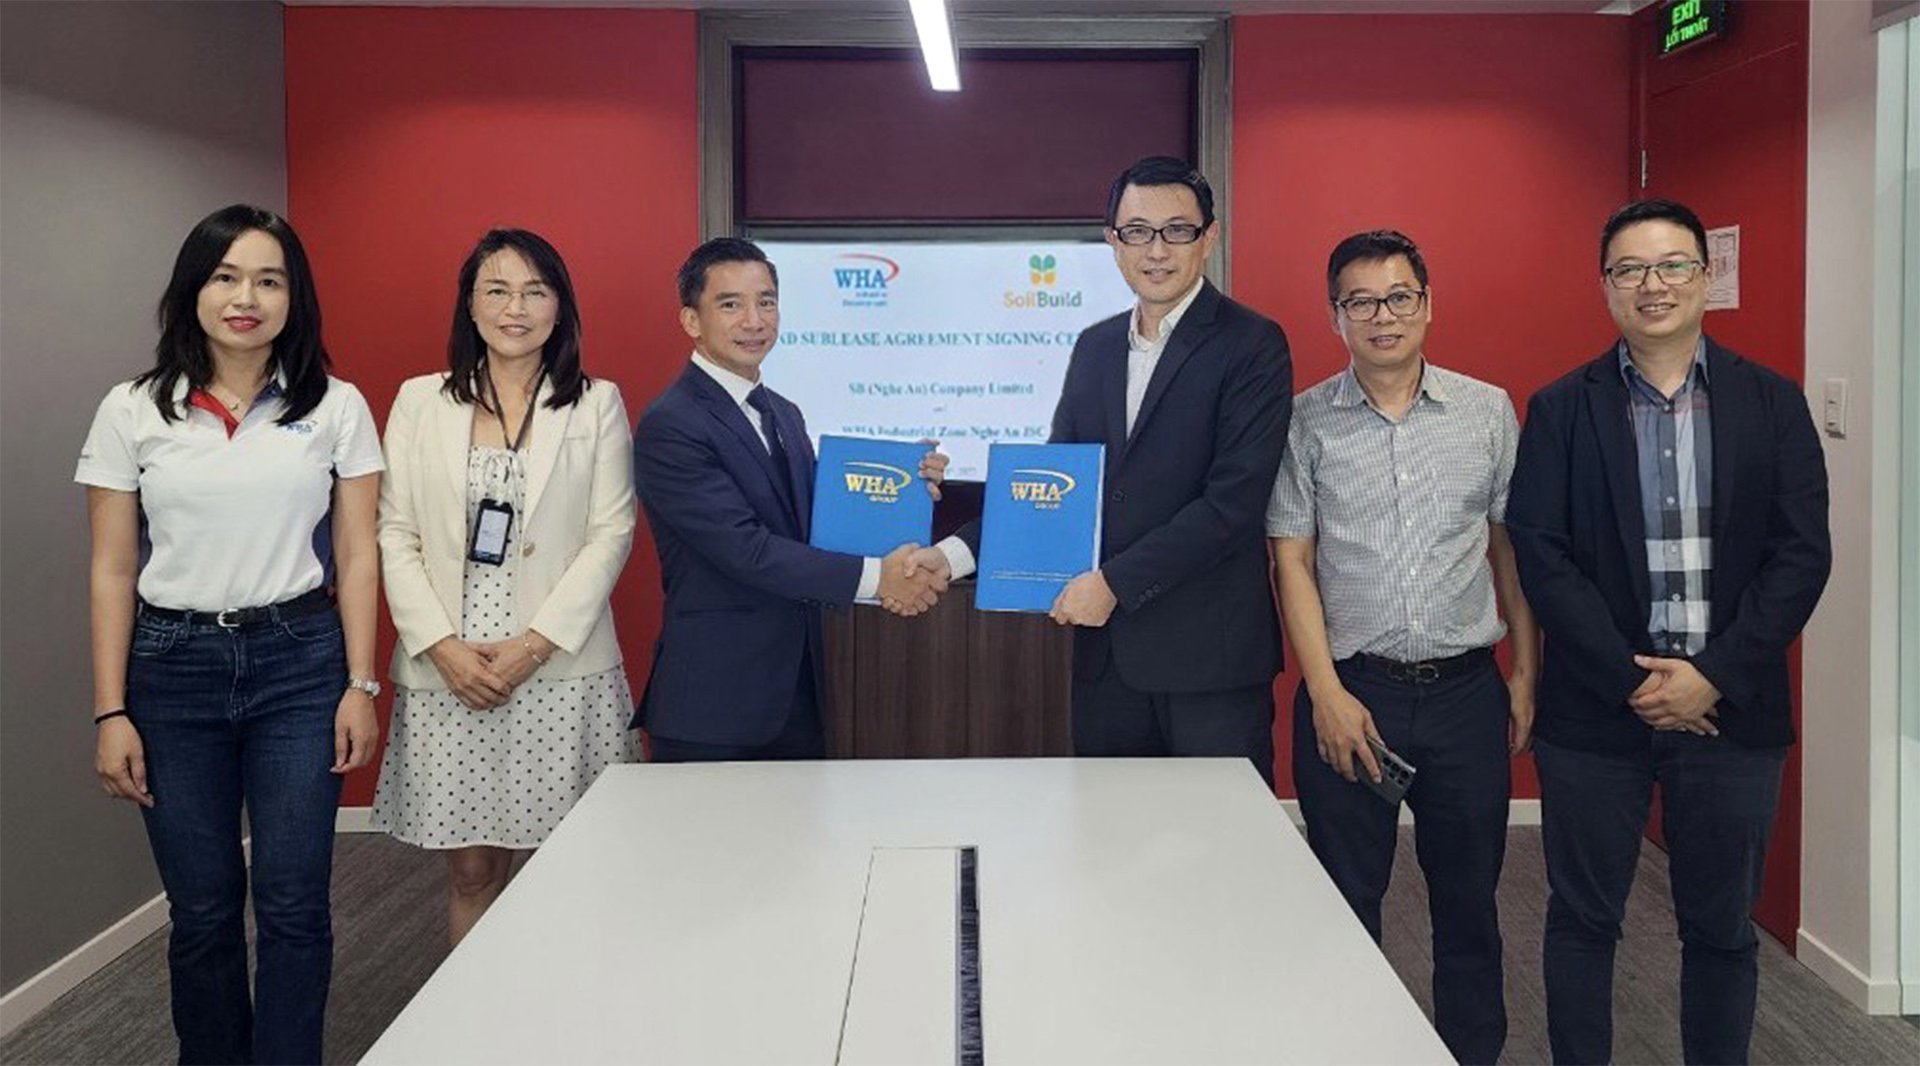 Soilbuild International finalizes land agreement with WHA Industrial Zone Nghe An to develop a new project in Nghe An province